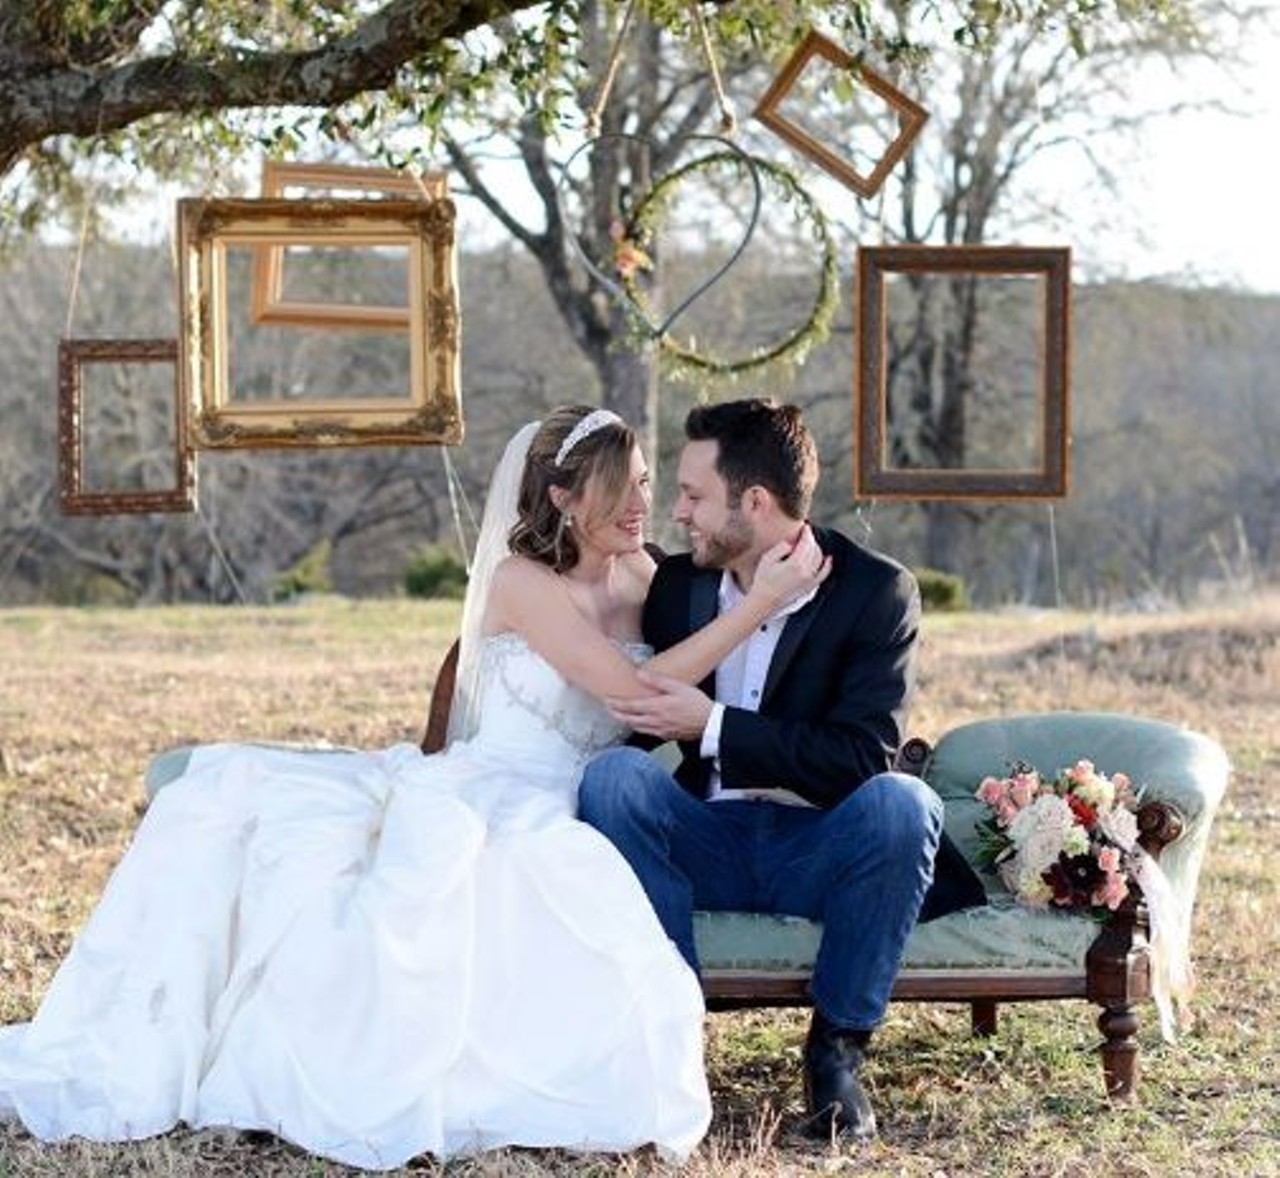 CW Hill Country Ranch Wedding Venue + Lodging
CW Hill Country Ranch is the perfect venue for smaller weddings. With indoor and outdoor ceremony options, the ranch offers lodging for up to 30 guests as well as a honeymoon suite.
13 CW Ranch Rd, Boerne, cwhillcountryranch.com
Photo via Facebook, CW Hill Country Ranch Wedding Venue